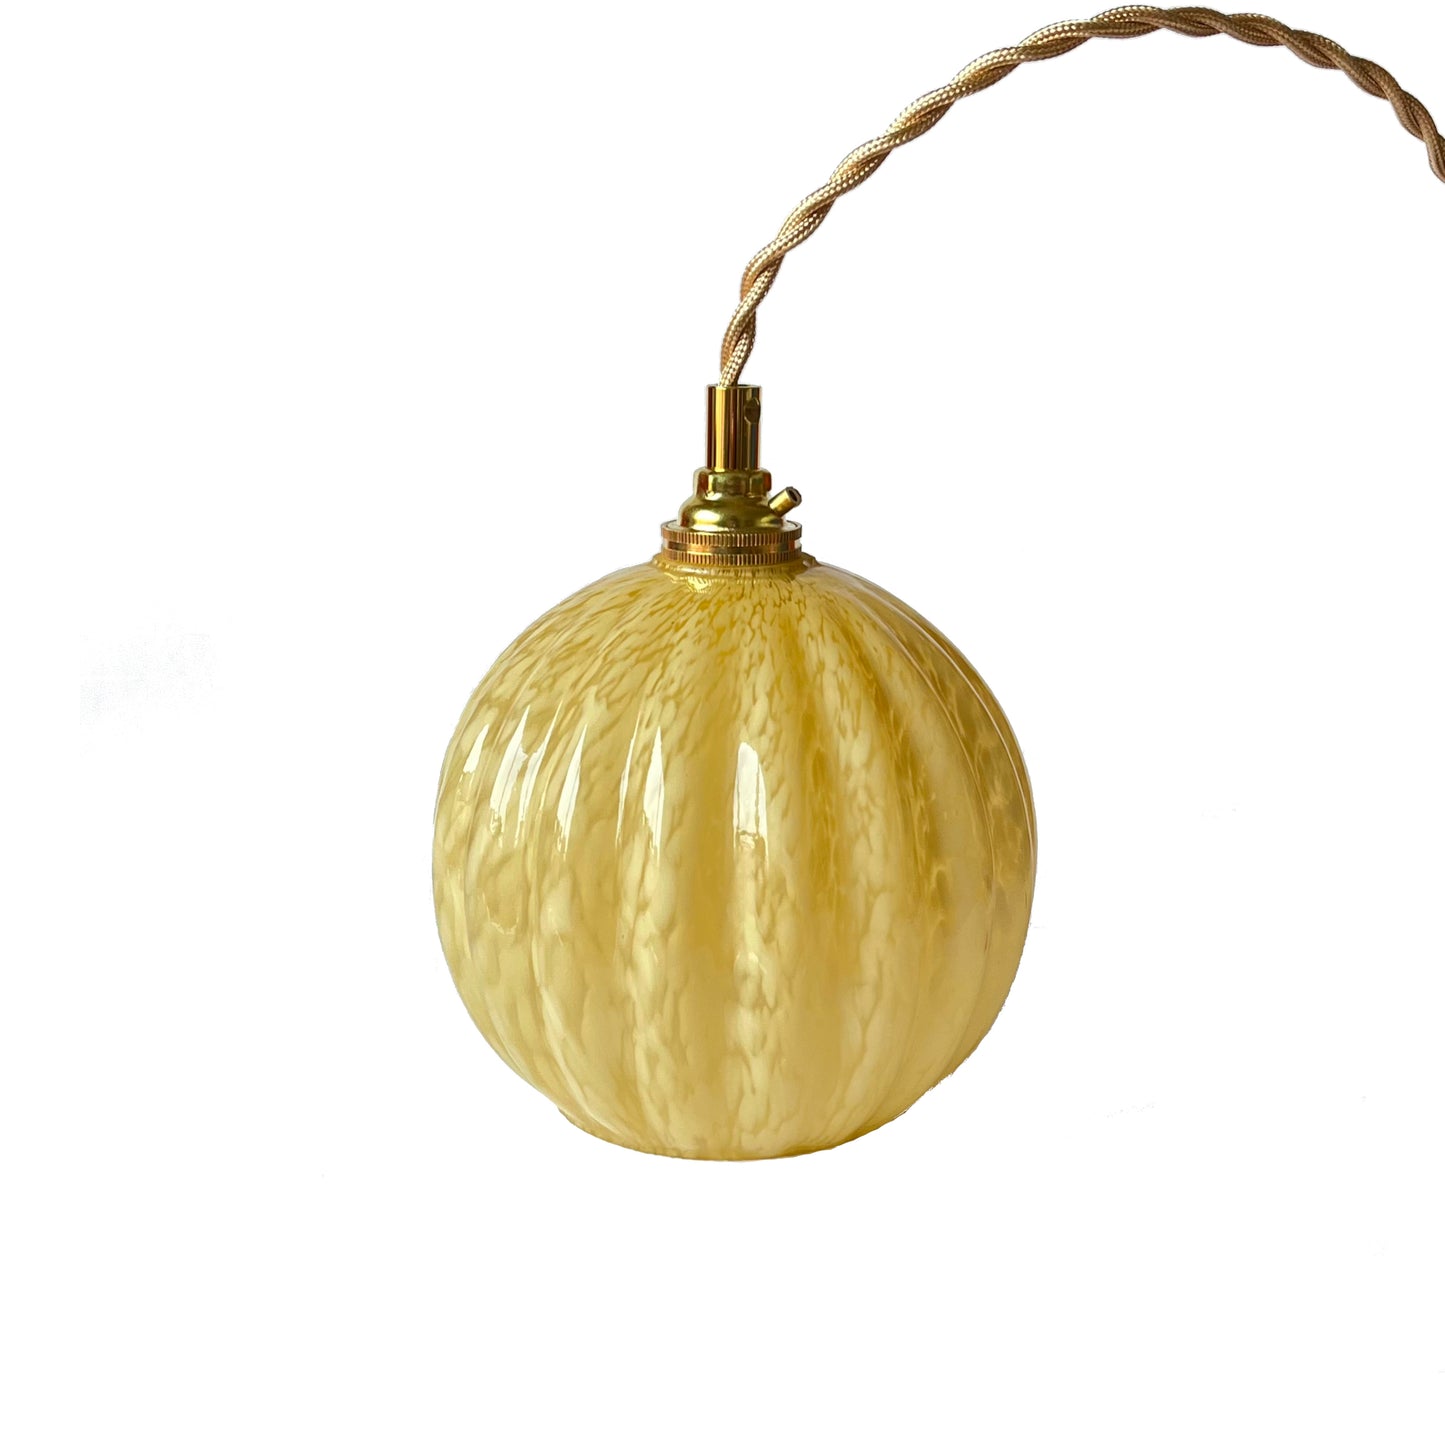 Upcycled portable lamp in Clichy's glass - yellow